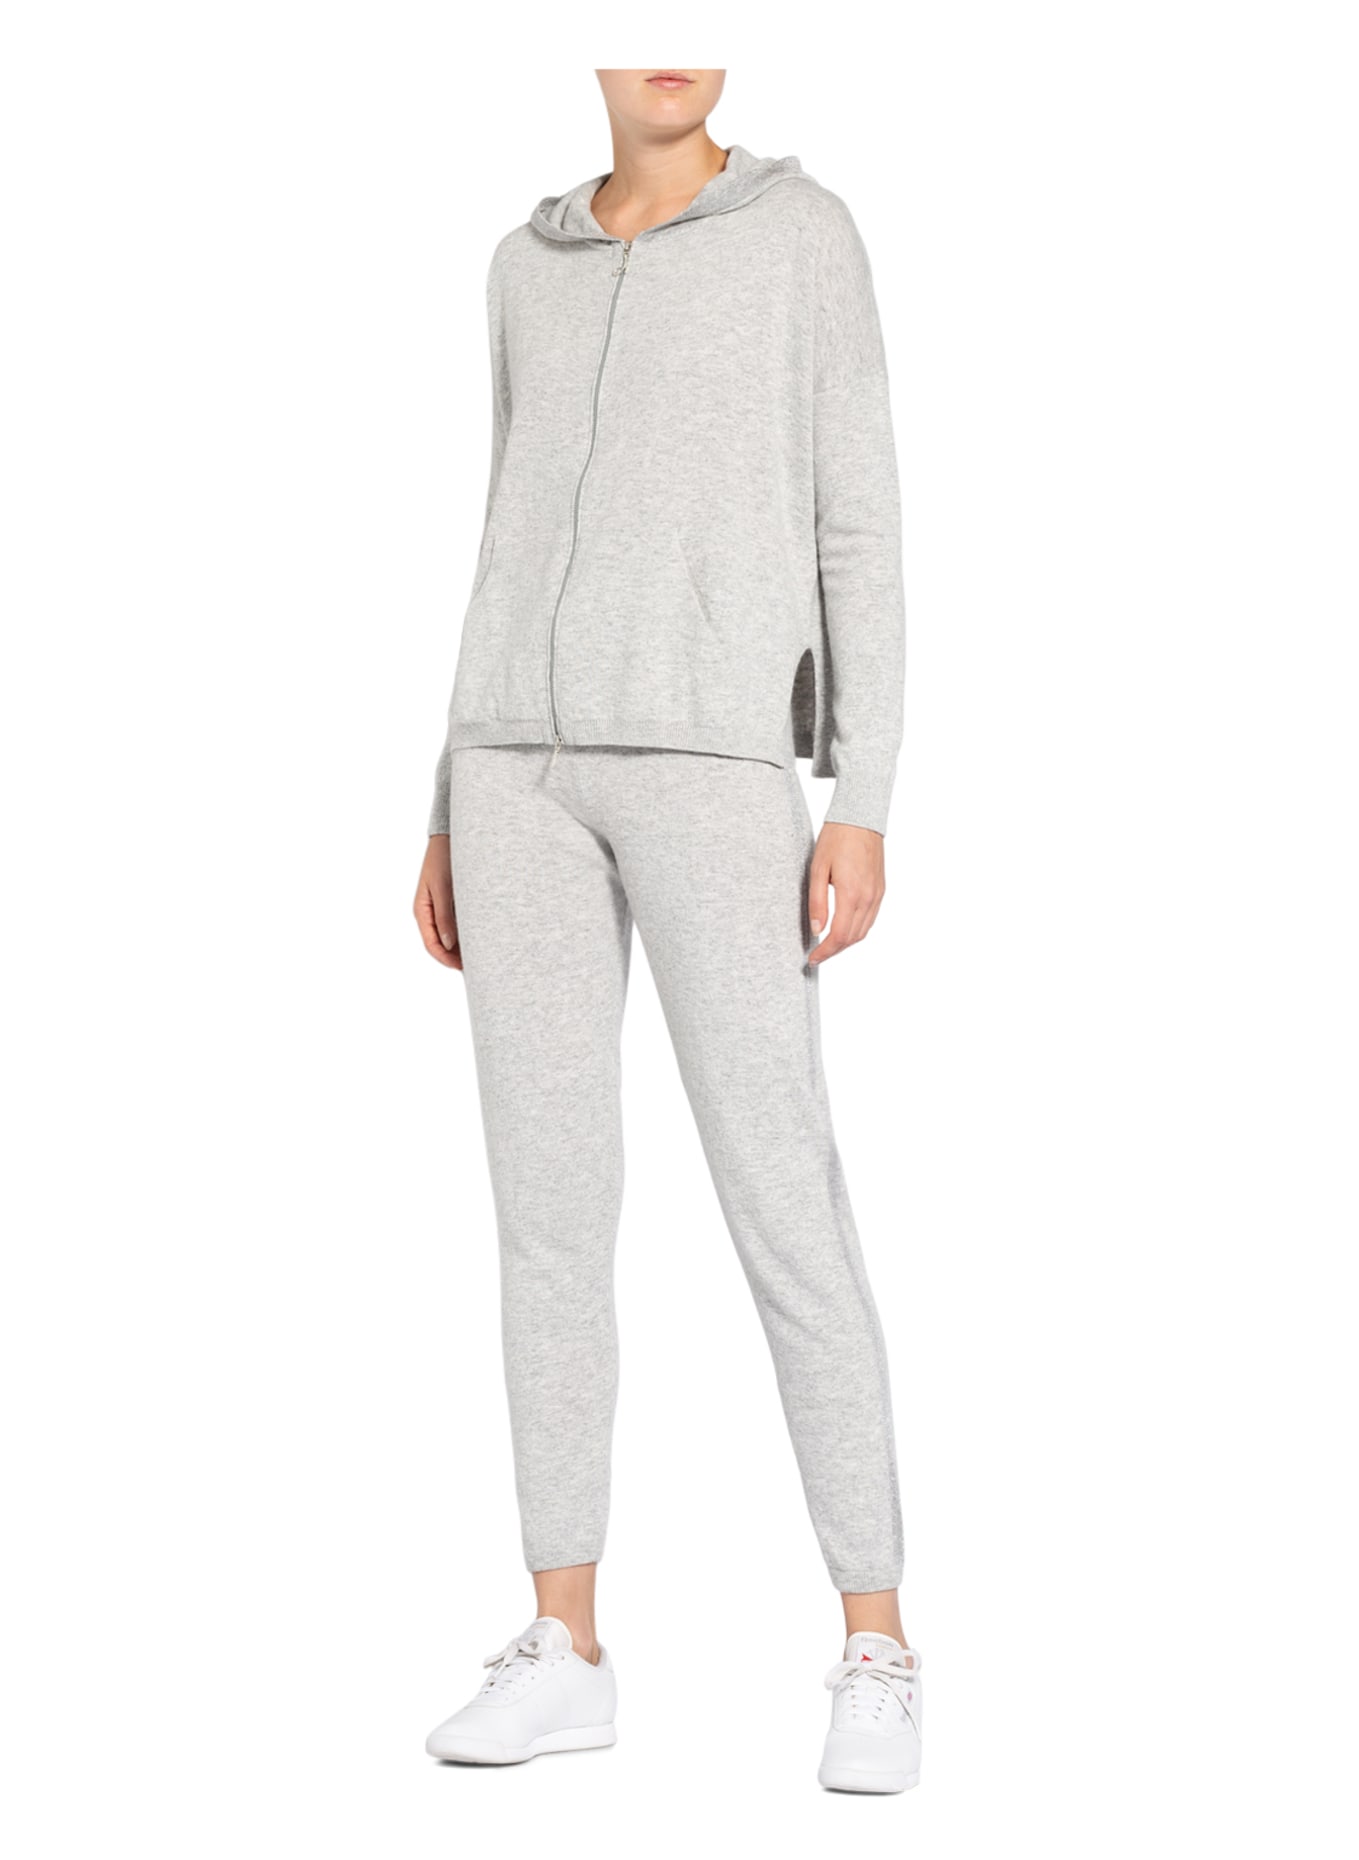 DEHA Knit fitness trousers, Color: LIGHT GRAY (Image 2)